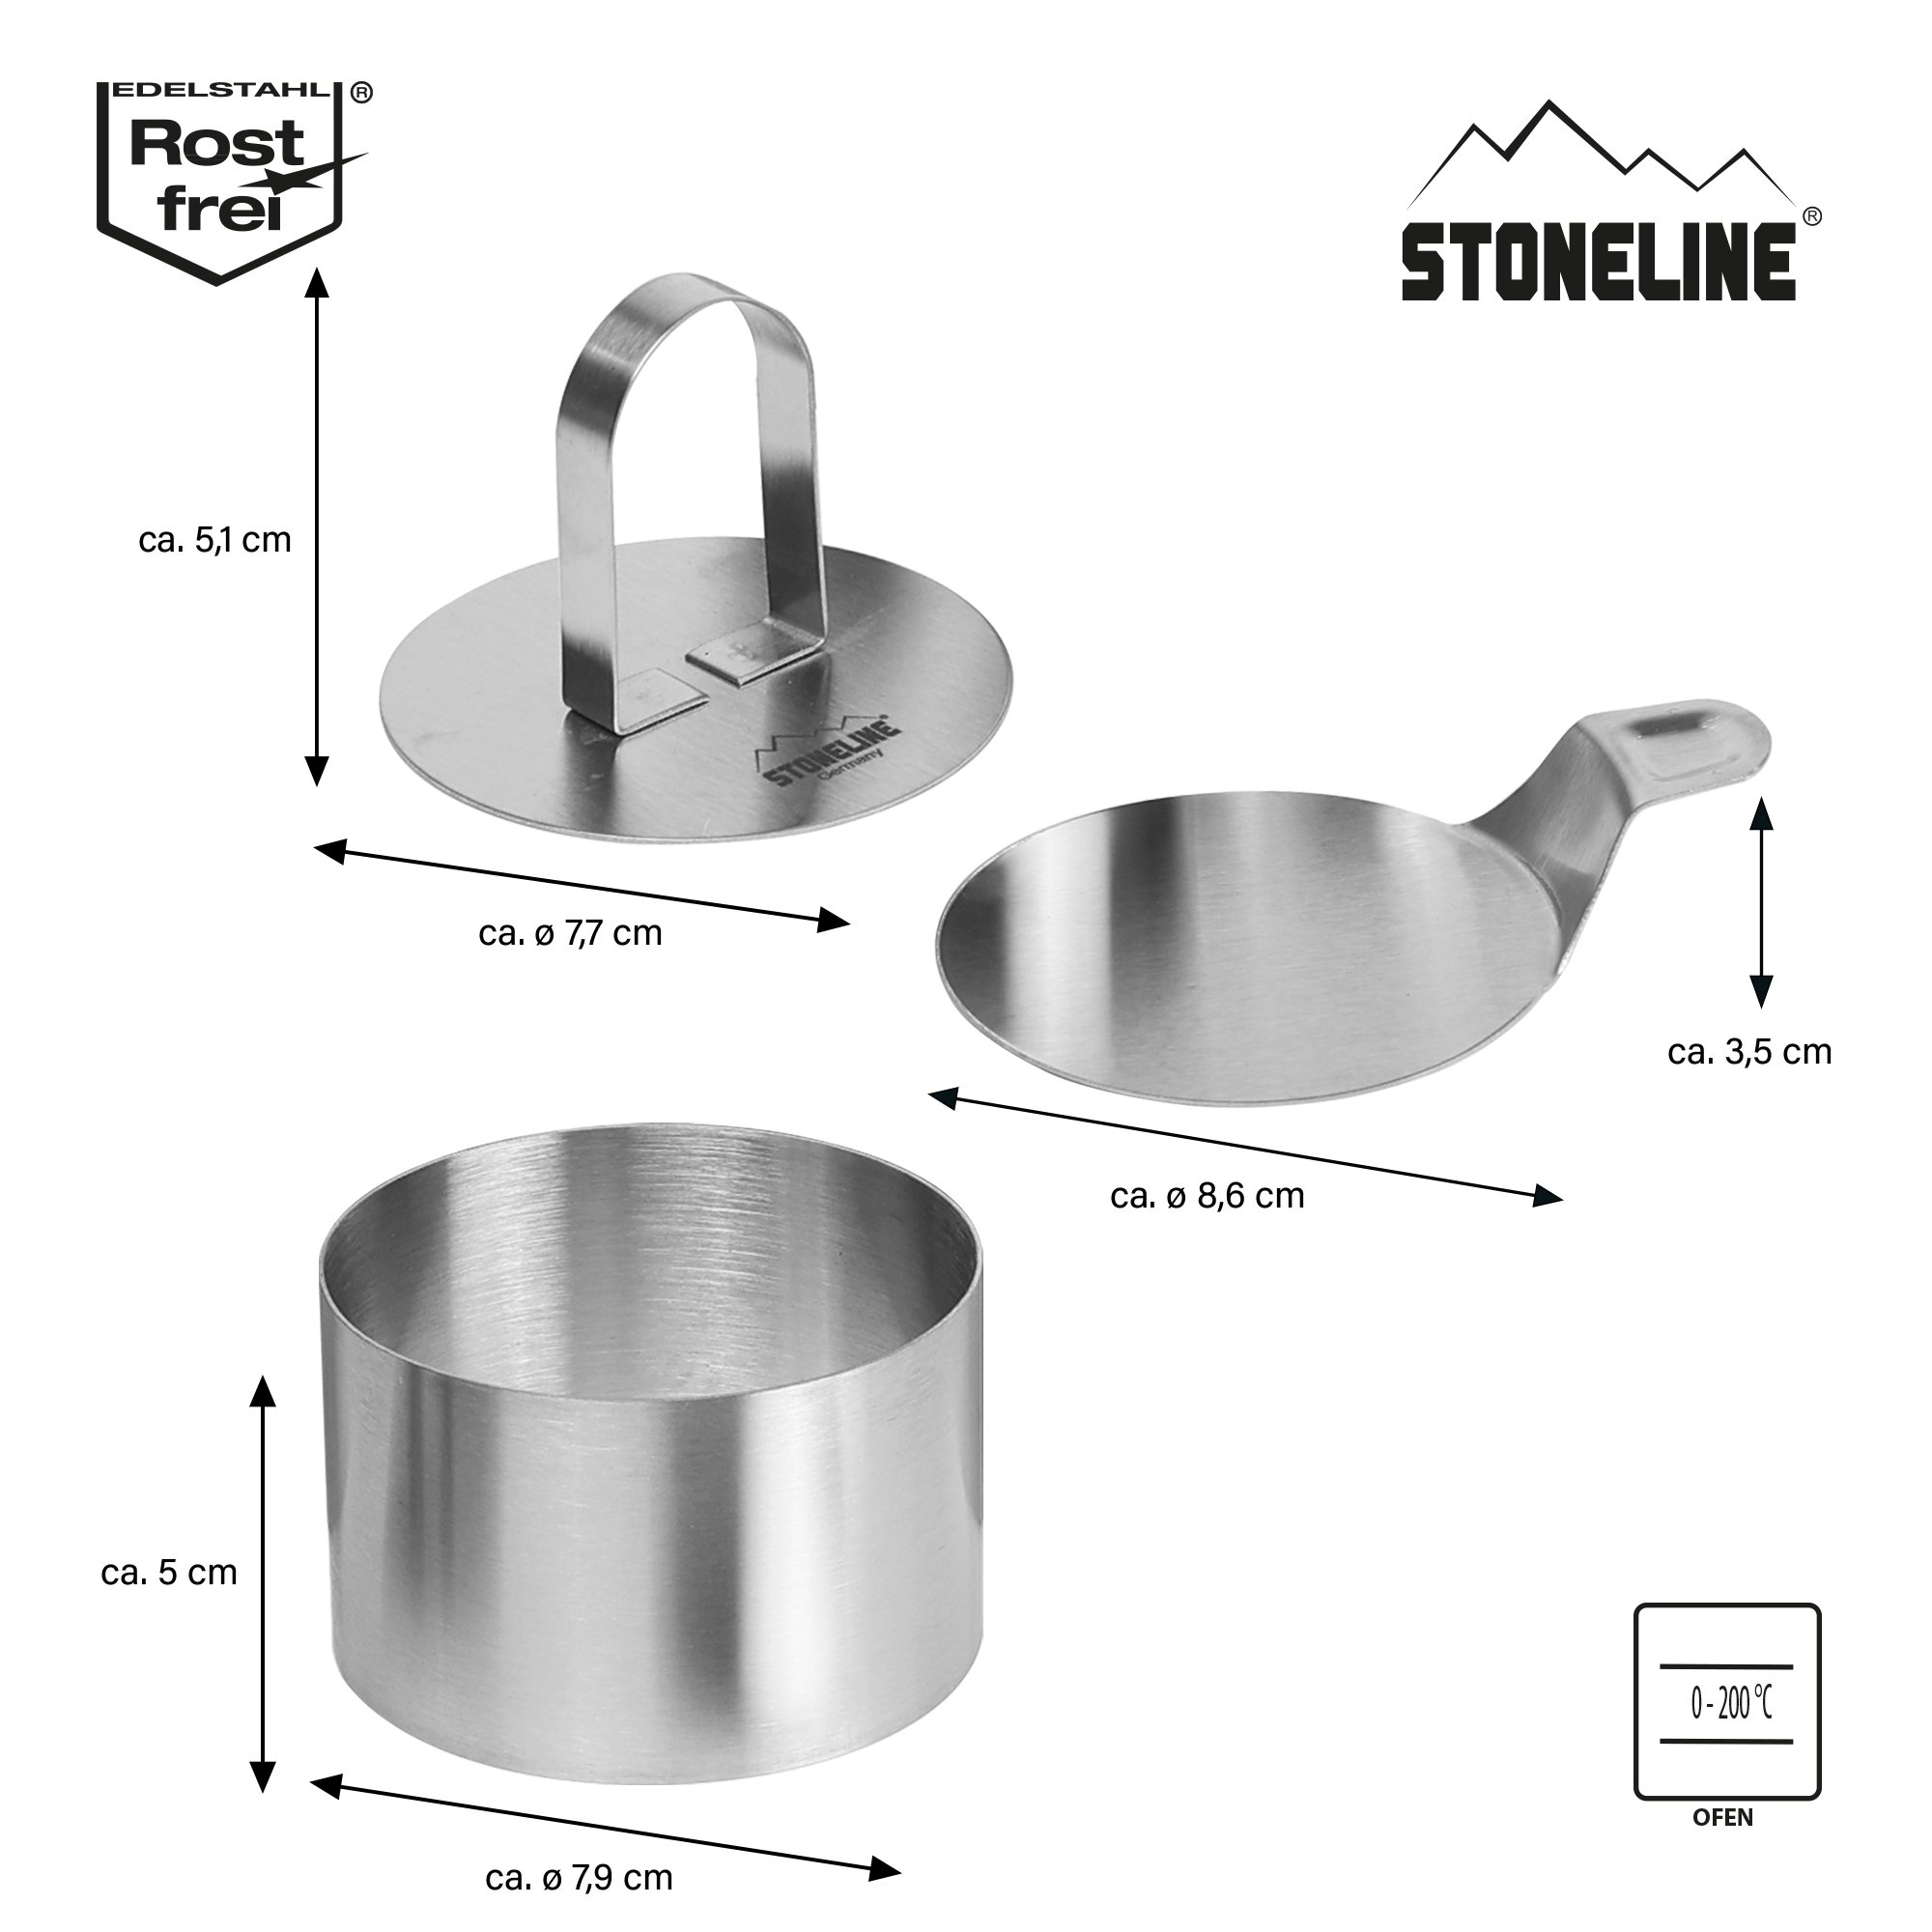 STONELINE® Dessert rings and food rings set, 8 pieces, stainless steel, 6 rings, 1 lifter, 1 punch, round